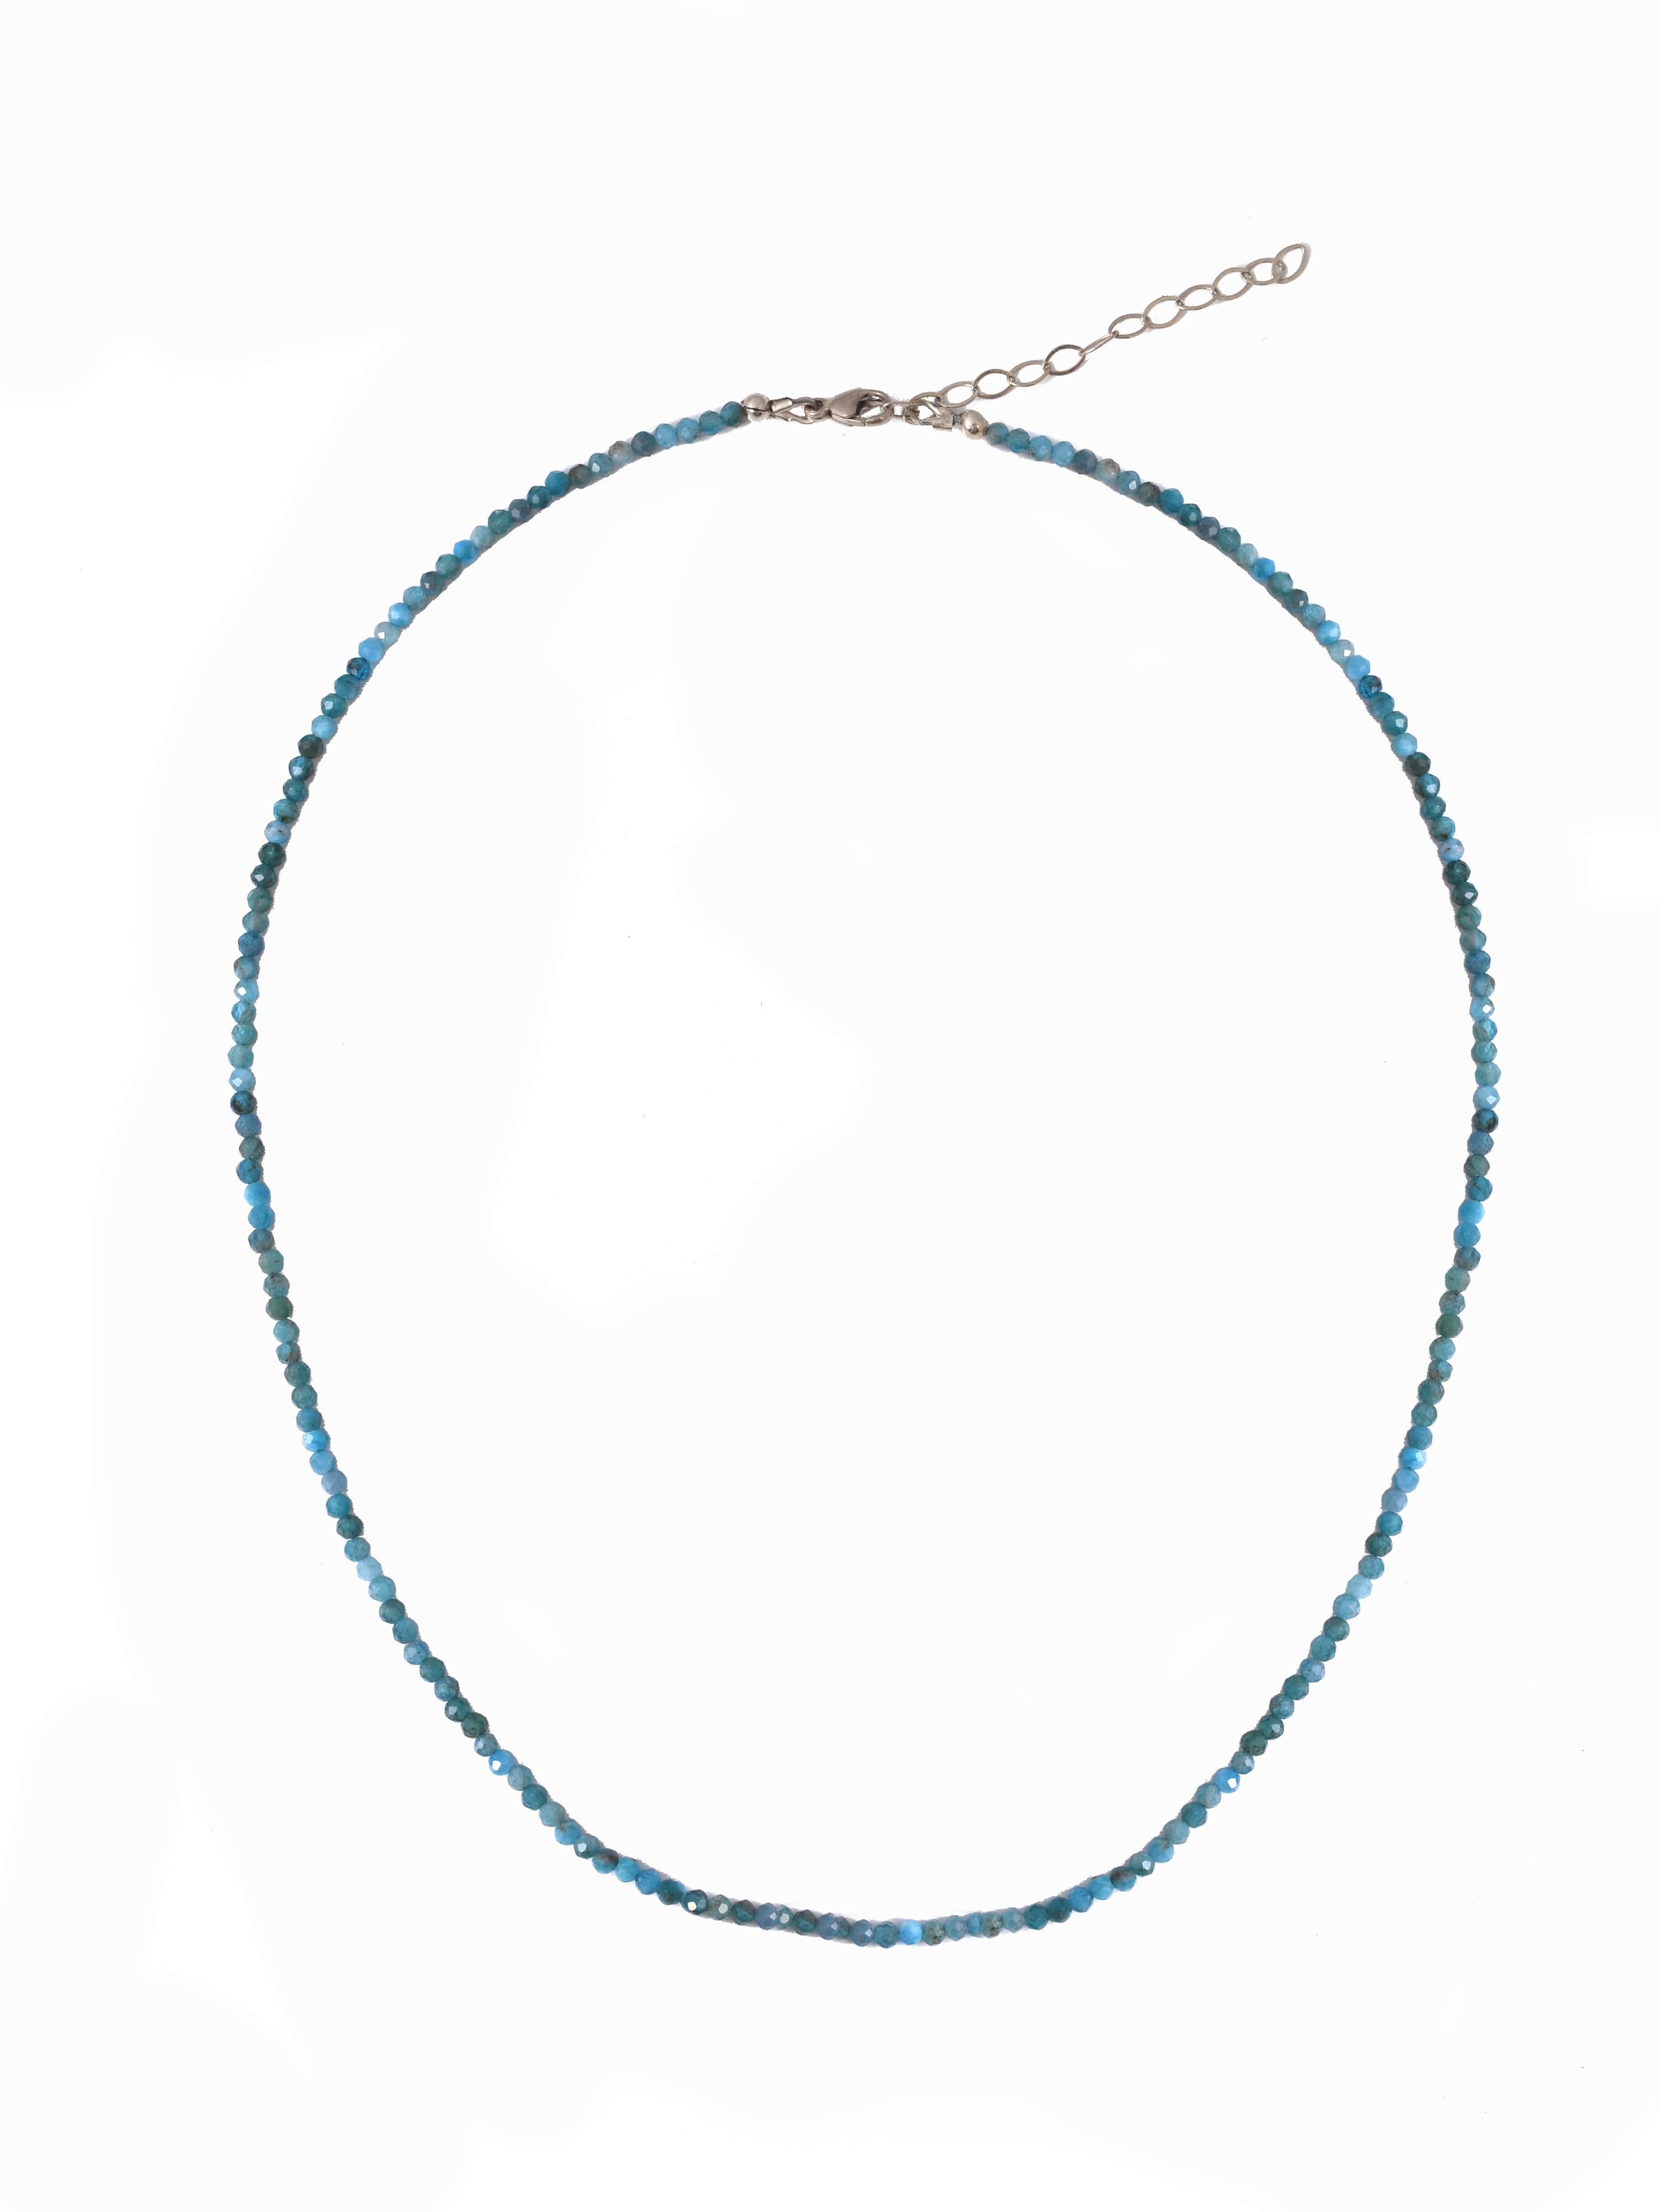 Blue Apatite Dainty Beaded Necklace